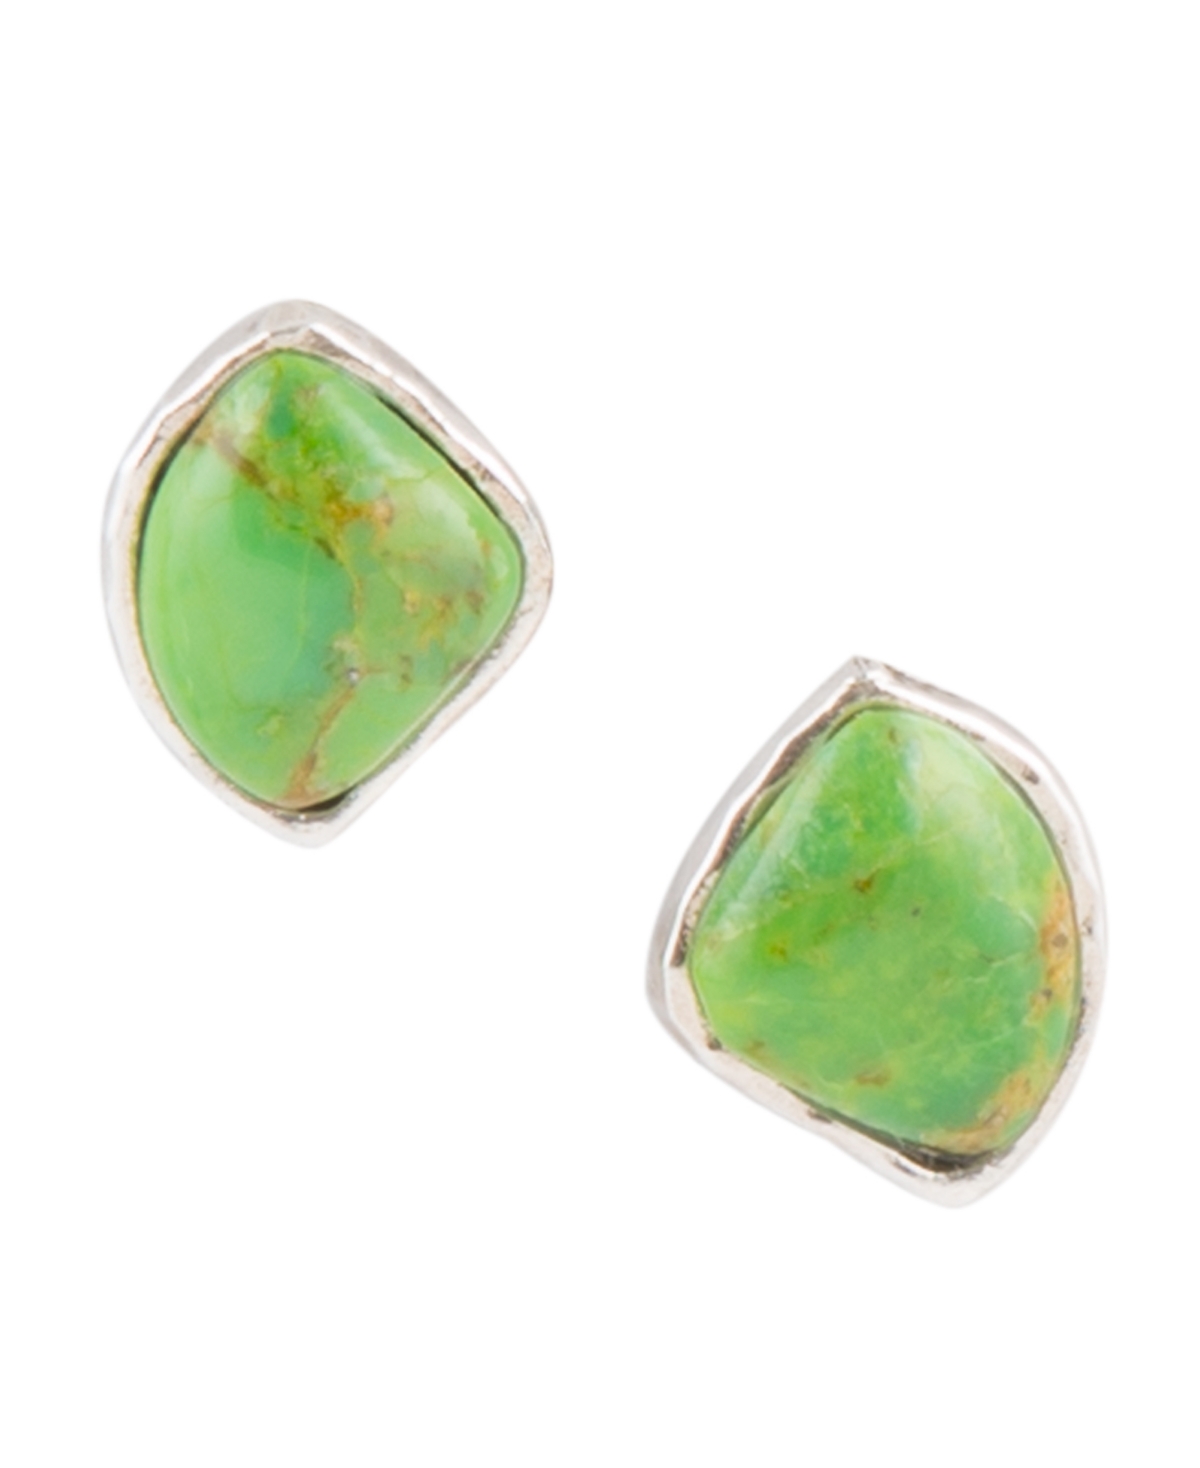 Barse Abstract Sterling Silver and Genuine Lime Turquoise Stud Earrings